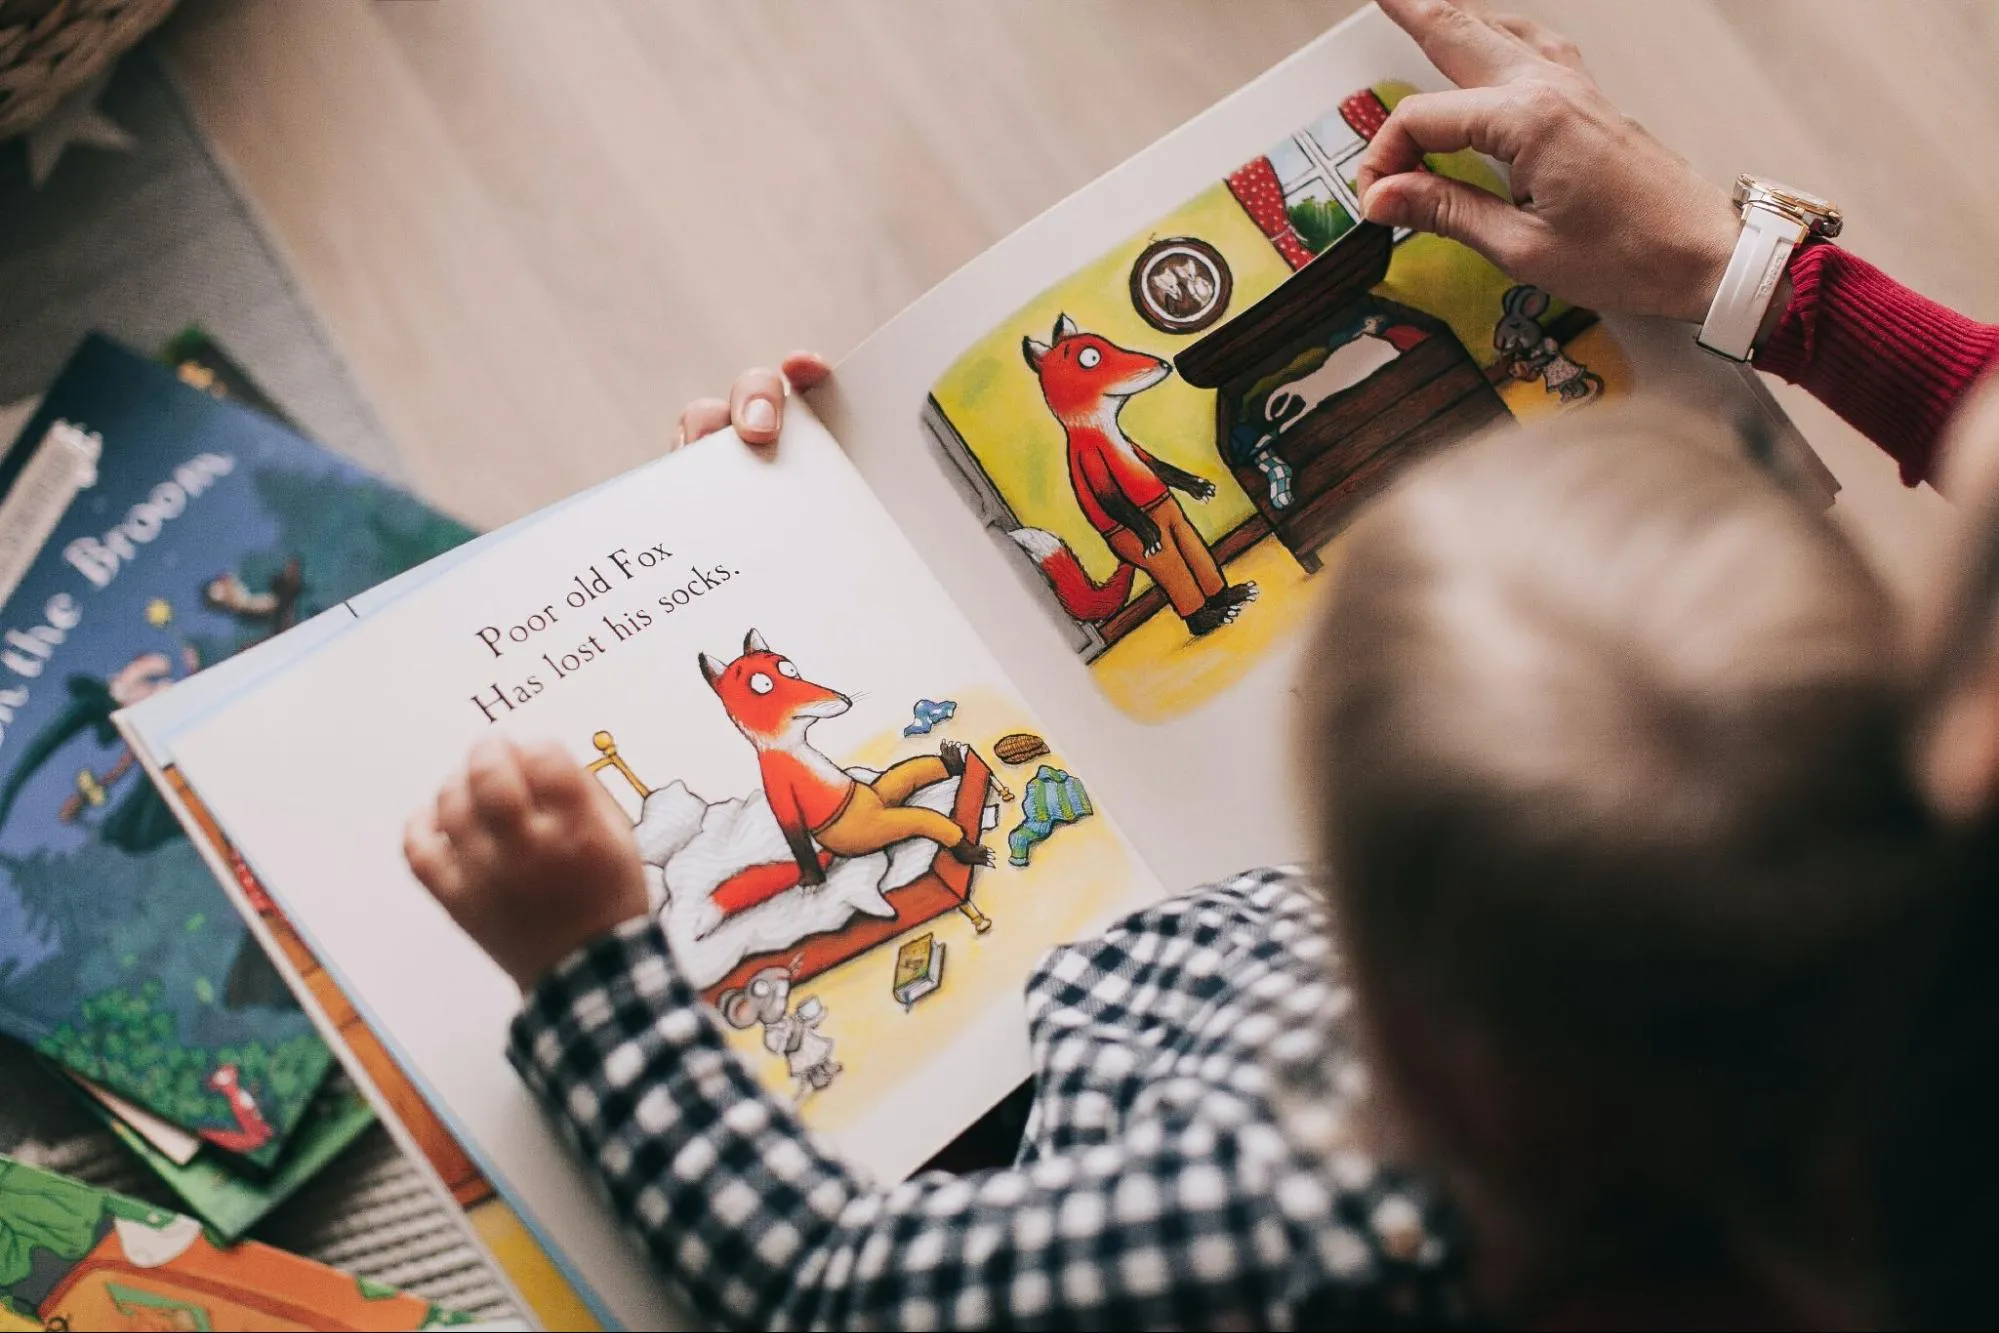 What children's books effectively connect fictional stories to real-world scenarios?